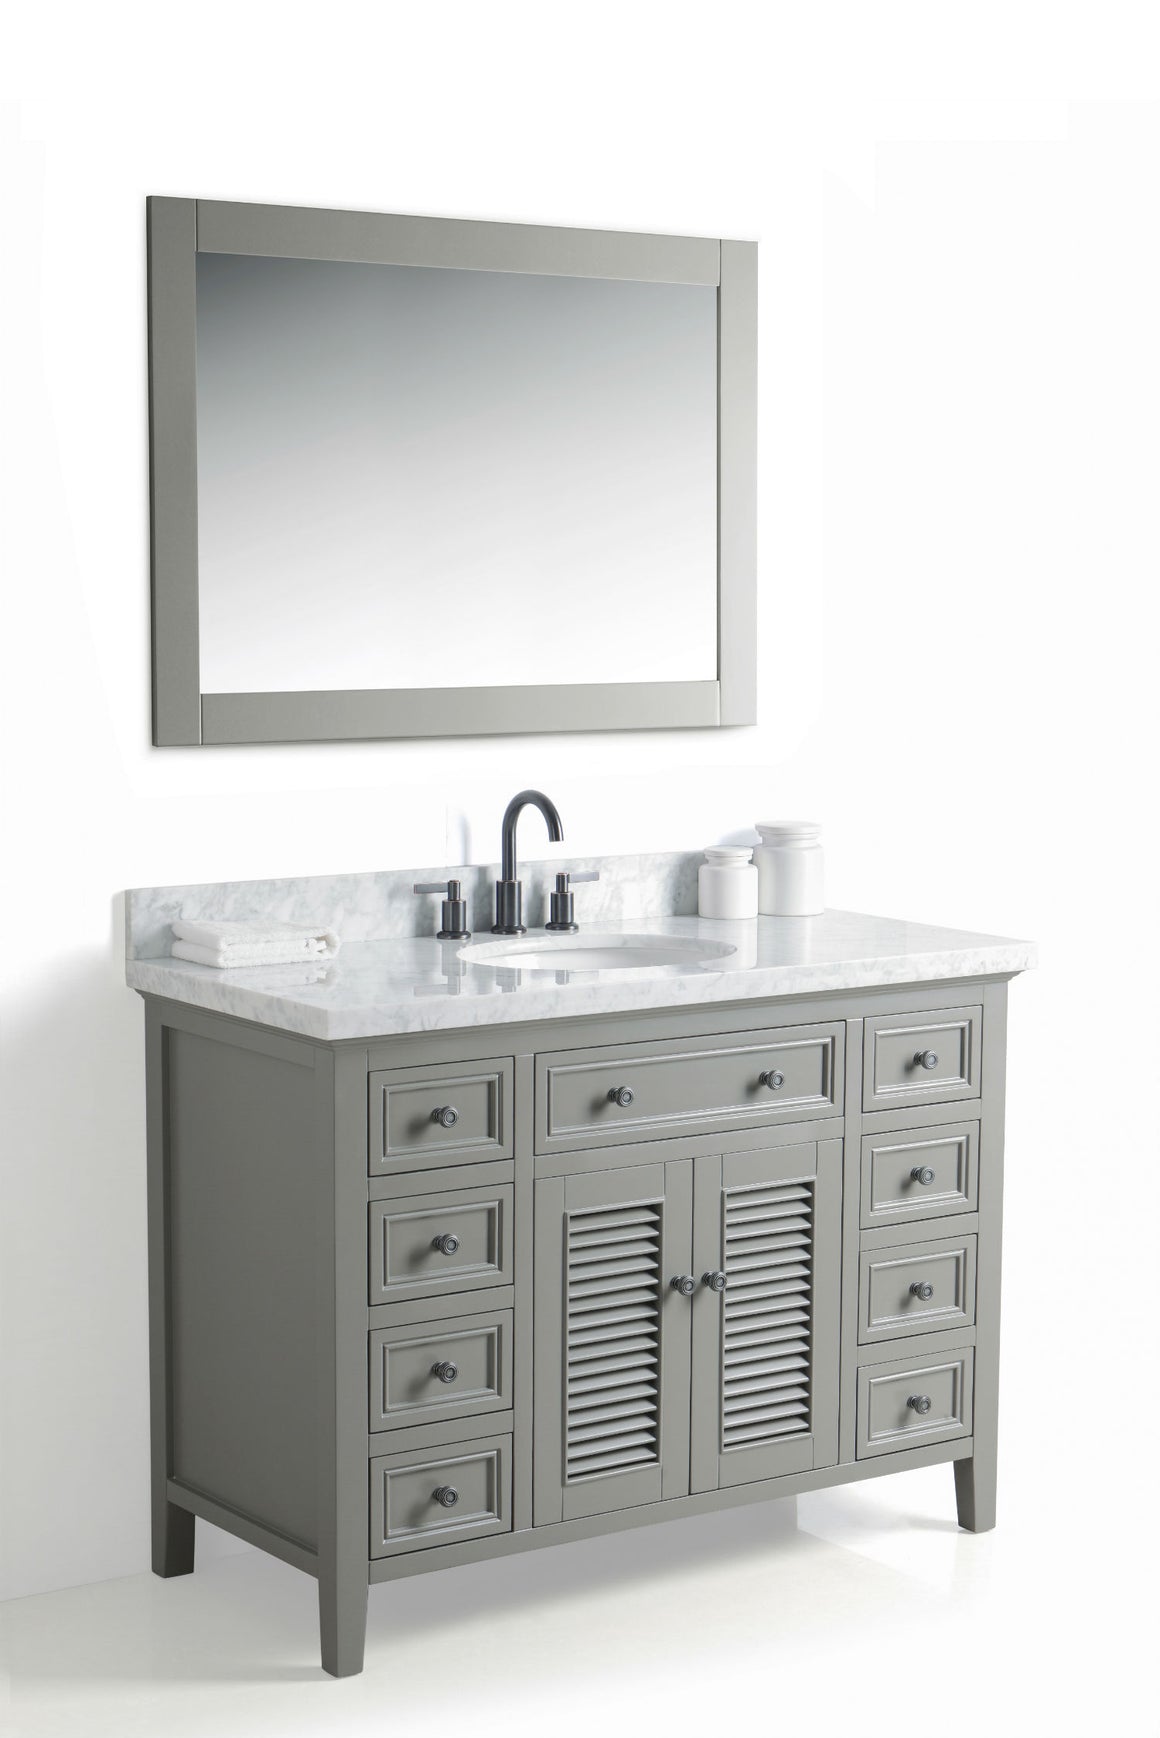 48" Grey Single Sink Bathroom Vanity with Marble Top and Faucet